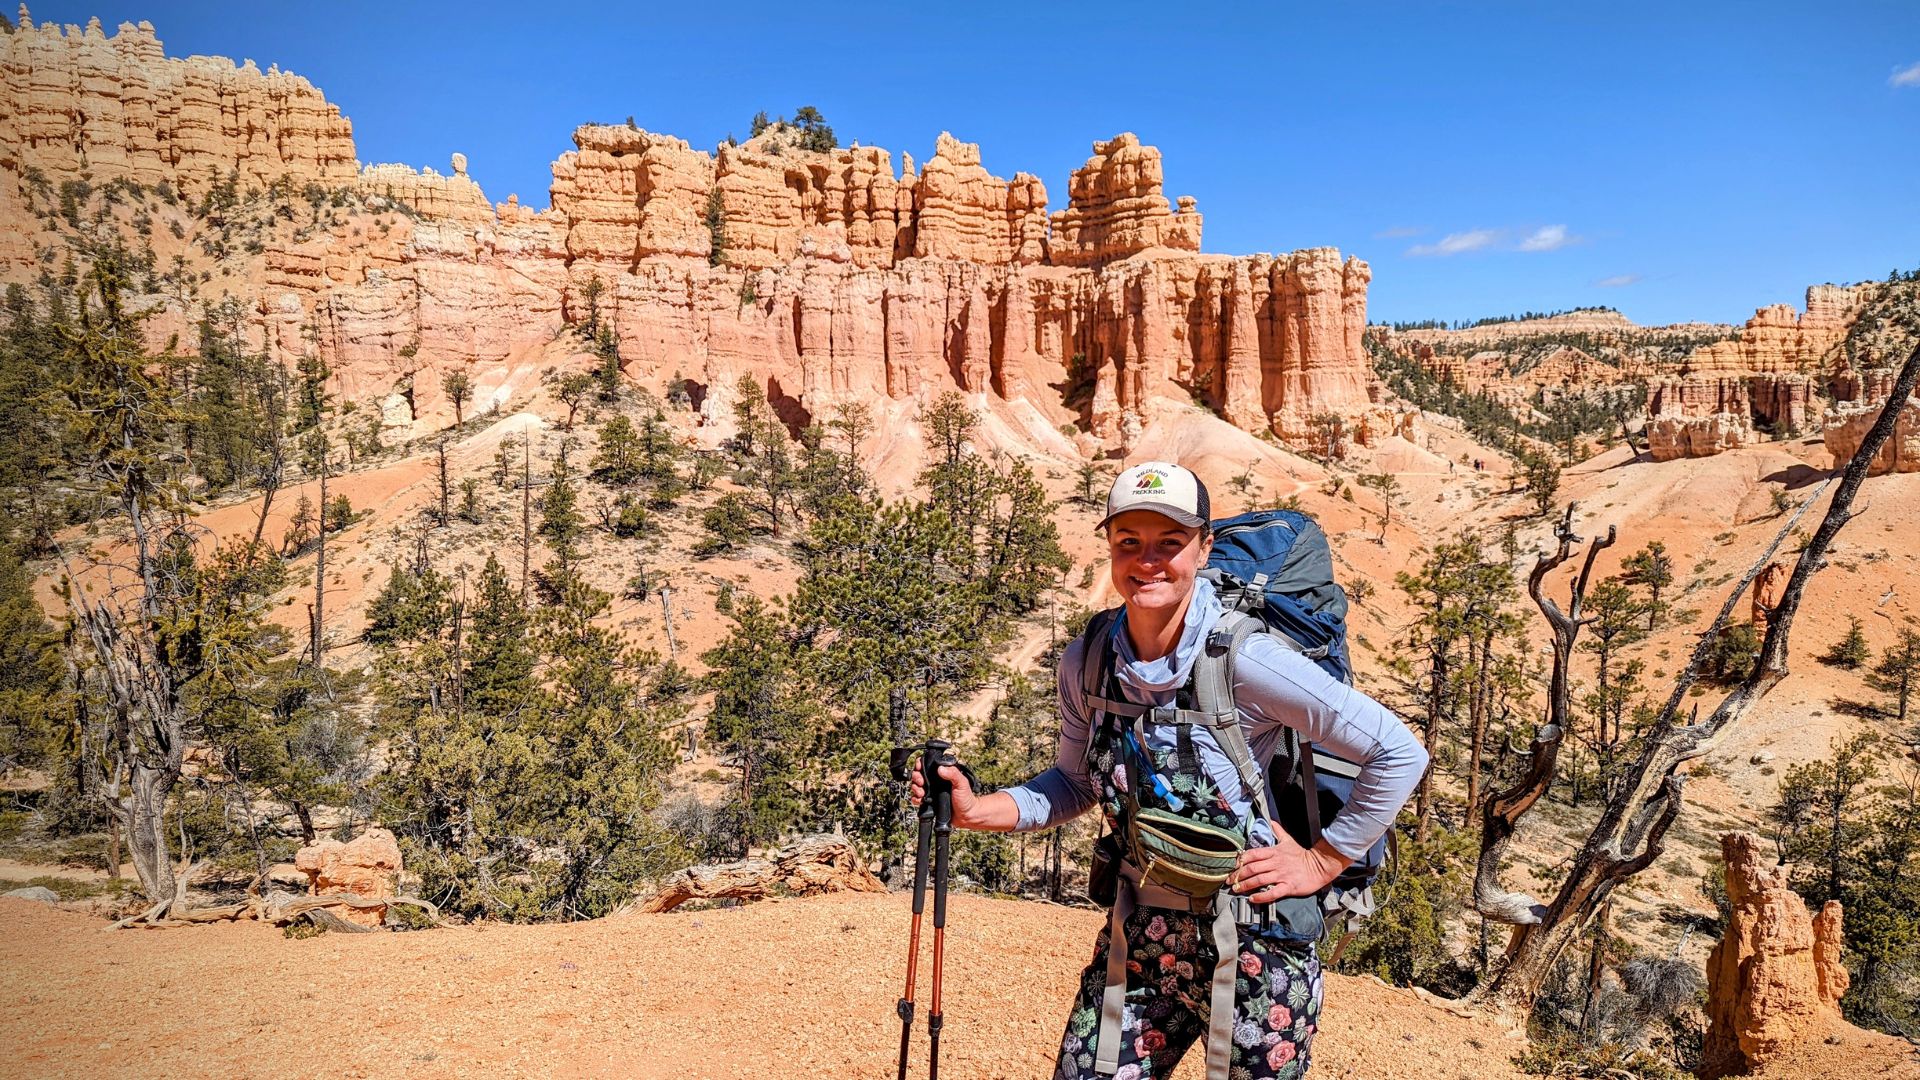 A hiker outfitted for a day in the desert stands in front of Bryce Canyon National Park hoodoos